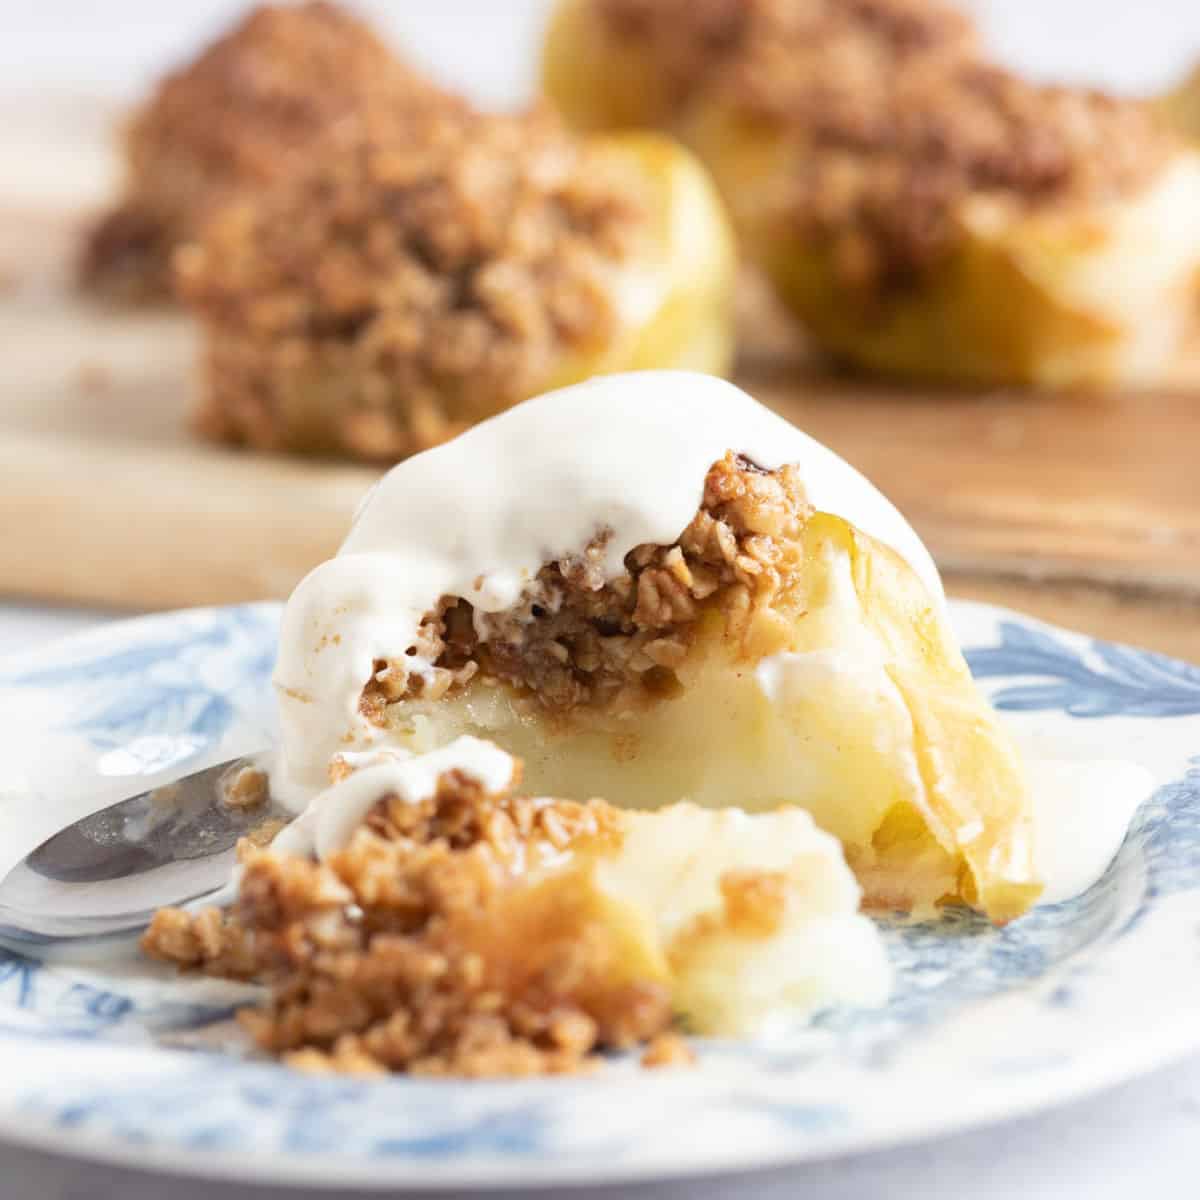 Air fryer baked apples on a plate with cream.